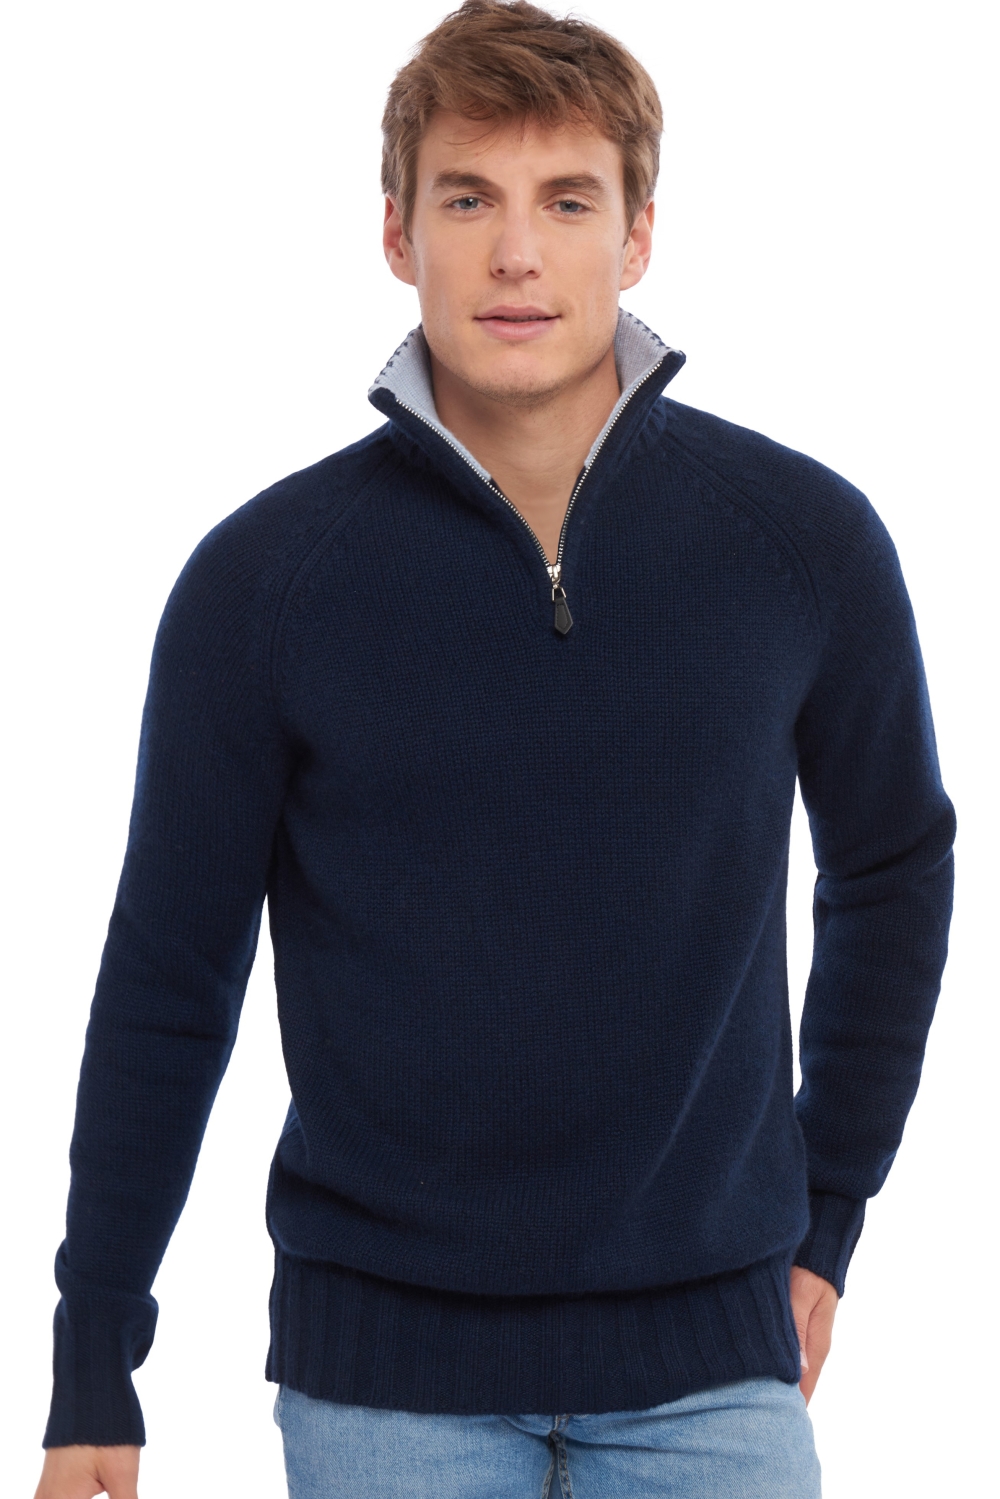 Cachemire pull homme olivier marine fonce ciel xs